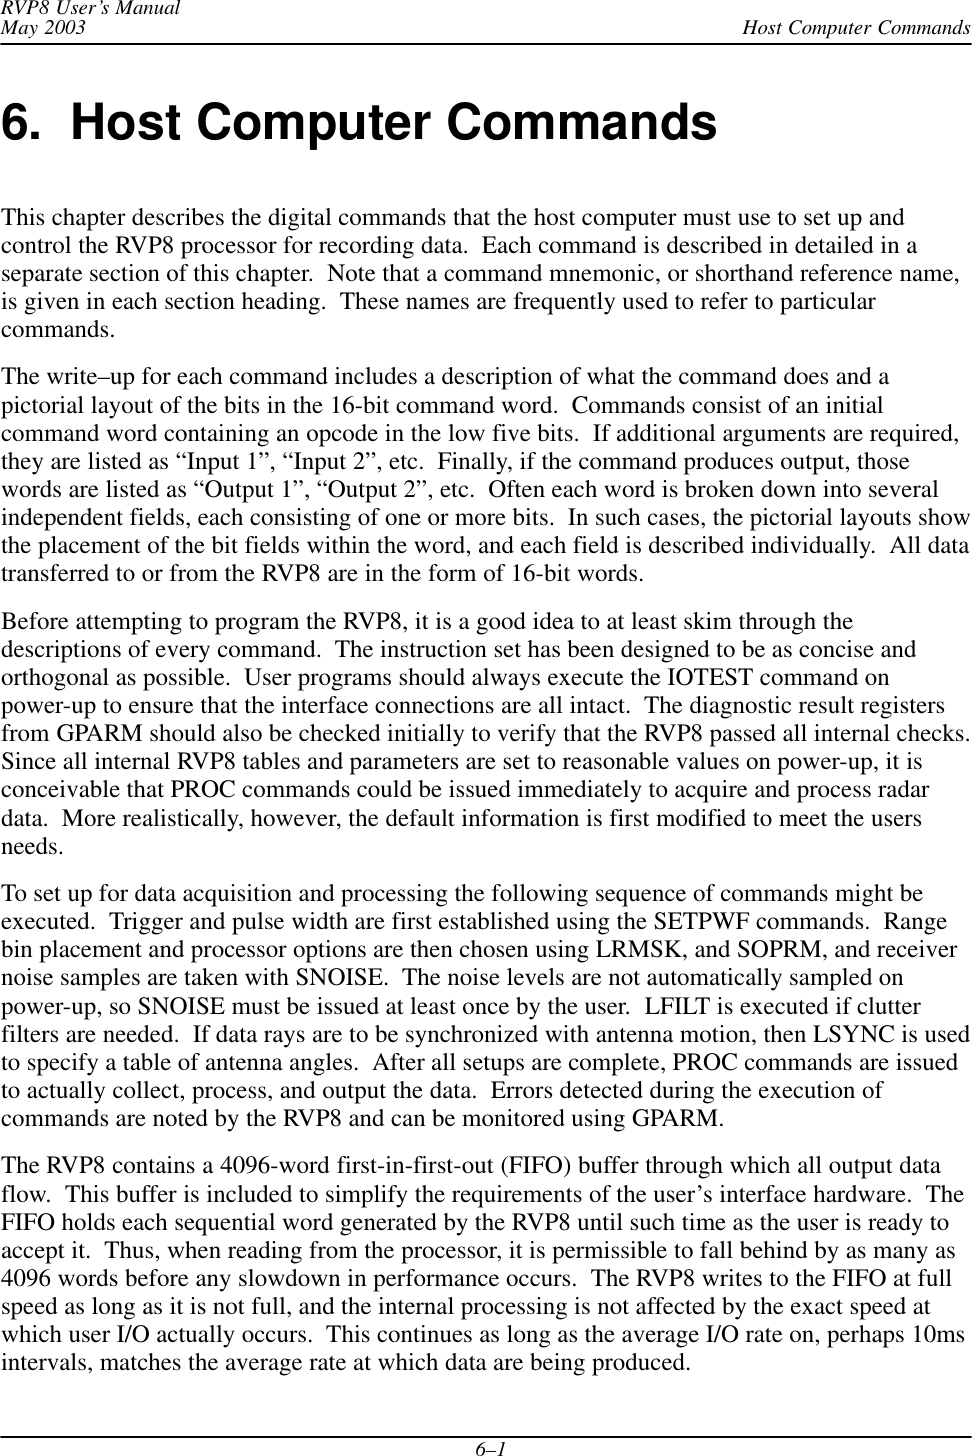 Host Computer CommandsRVP8 User’s ManualMay 20036–16.  Host Computer CommandsThis chapter describes the digital commands that the host computer must use to set up andcontrol the RVP8 processor for recording data.  Each command is described in detailed in aseparate section of this chapter.  Note that a command mnemonic, or shorthand reference name,is given in each section heading.  These names are frequently used to refer to particularcommands.The write–up for each command includes a description of what the command does and apictorial layout of the bits in the 16-bit command word.  Commands consist of an initialcommand word containing an opcode in the low five bits.  If additional arguments are required,they are listed as “Input 1”, “Input 2”, etc.  Finally, if the command produces output, thosewords are listed as “Output 1”, “Output 2”, etc.  Often each word is broken down into severalindependent fields, each consisting of one or more bits.  In such cases, the pictorial layouts showthe placement of the bit fields within the word, and each field is described individually.  All datatransferred to or from the RVP8 are in the form of 16-bit words.Before attempting to program the RVP8, it is a good idea to at least skim through thedescriptions of every command.  The instruction set has been designed to be as concise andorthogonal as possible.  User programs should always execute the IOTEST command onpower-up to ensure that the interface connections are all intact.  The diagnostic result registersfrom GPARM should also be checked initially to verify that the RVP8 passed all internal checks.Since all internal RVP8 tables and parameters are set to reasonable values on power-up, it isconceivable that PROC commands could be issued immediately to acquire and process radardata.  More realistically, however, the default information is first modified to meet the usersneeds.To set up for data acquisition and processing the following sequence of commands might beexecuted.  Trigger and pulse width are first established using the SETPWF commands.  Rangebin placement and processor options are then chosen using LRMSK, and SOPRM, and receivernoise samples are taken with SNOISE.  The noise levels are not automatically sampled onpower-up, so SNOISE must be issued at least once by the user.  LFILT is executed if clutterfilters are needed.  If data rays are to be synchronized with antenna motion, then LSYNC is usedto specify a table of antenna angles.  After all setups are complete, PROC commands are issuedto actually collect, process, and output the data.  Errors detected during the execution ofcommands are noted by the RVP8 and can be monitored using GPARM.The RVP8 contains a 4096-word first-in-first-out (FIFO) buffer through which all output dataflow.  This buffer is included to simplify the requirements of the user’s interface hardware.  TheFIFO holds each sequential word generated by the RVP8 until such time as the user is ready toaccept it.  Thus, when reading from the processor, it is permissible to fall behind by as many as4096 words before any slowdown in performance occurs.  The RVP8 writes to the FIFO at fullspeed as long as it is not full, and the internal processing is not affected by the exact speed atwhich user I/O actually occurs.  This continues as long as the average I/O rate on, perhaps 10msintervals, matches the average rate at which data are being produced.